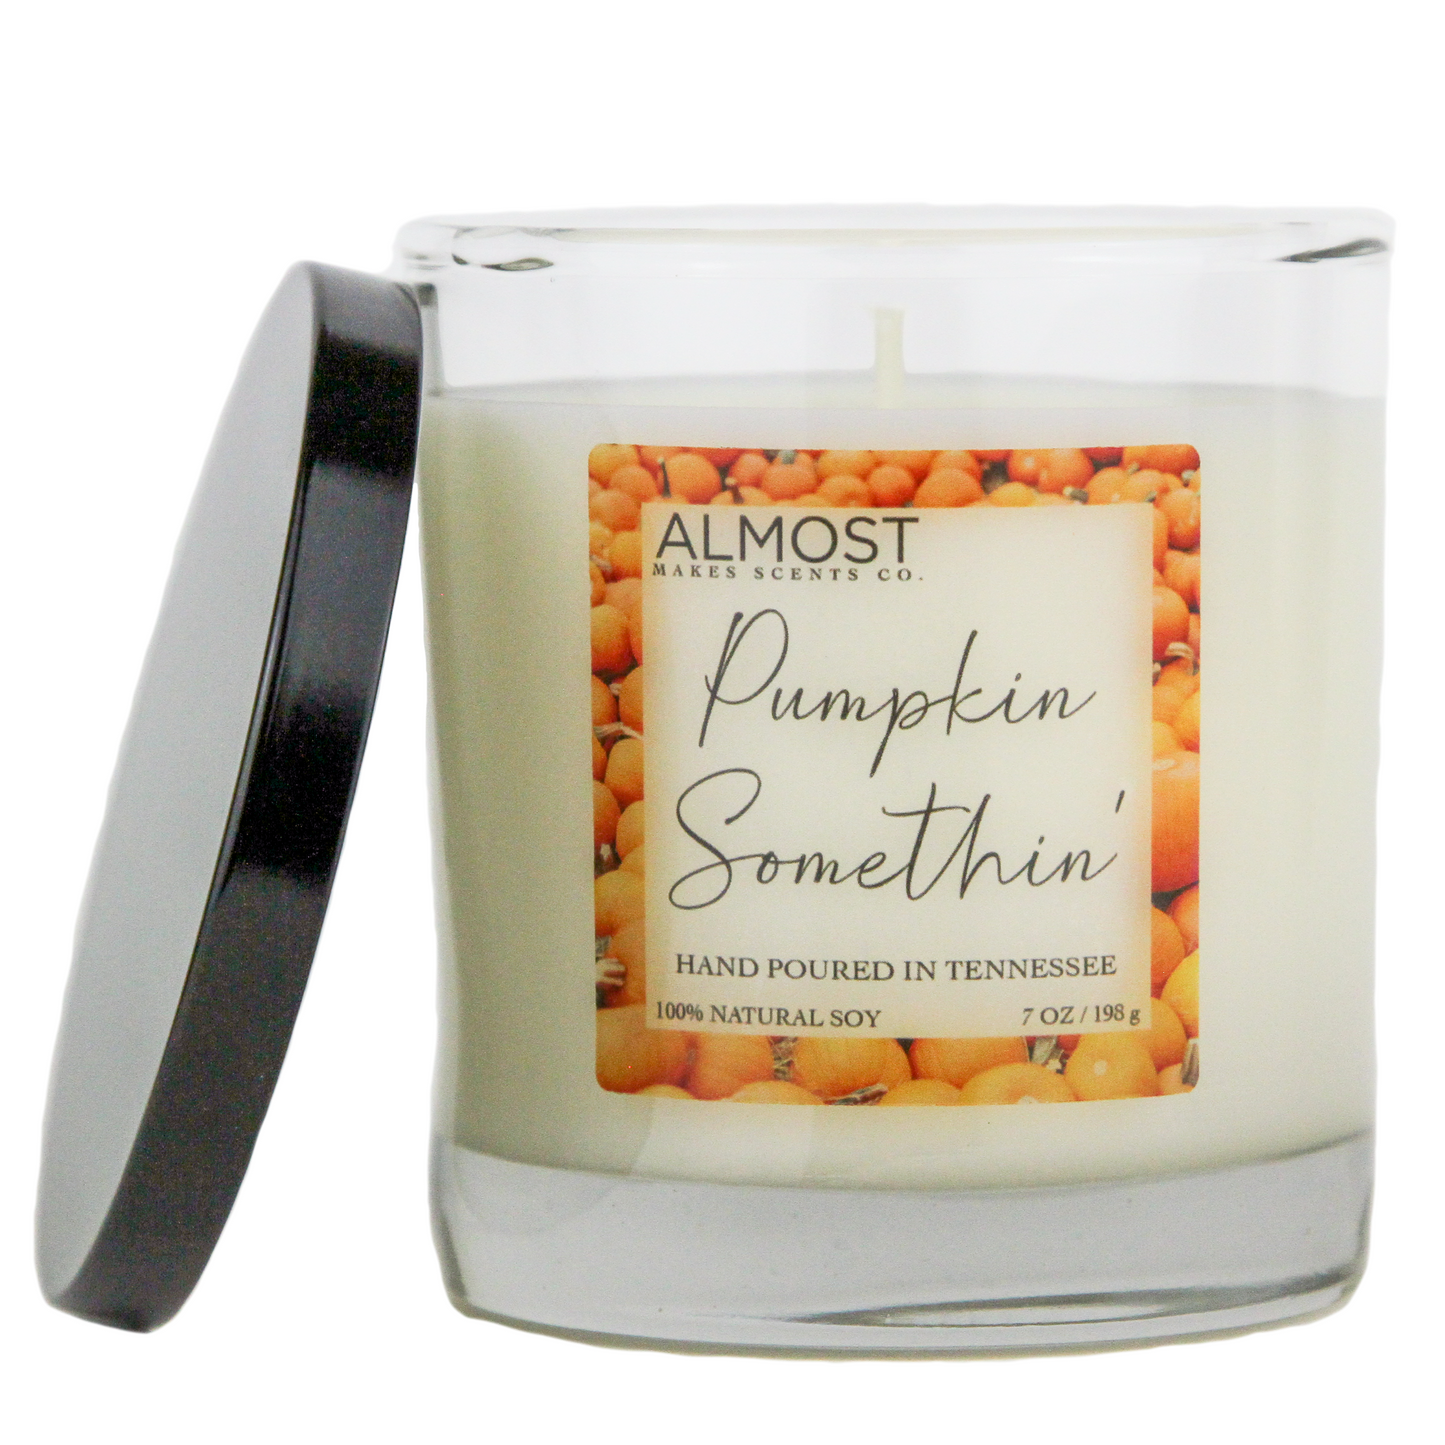 Pumpkin Somethin' Handcrafted All Soy Candle 7 oz